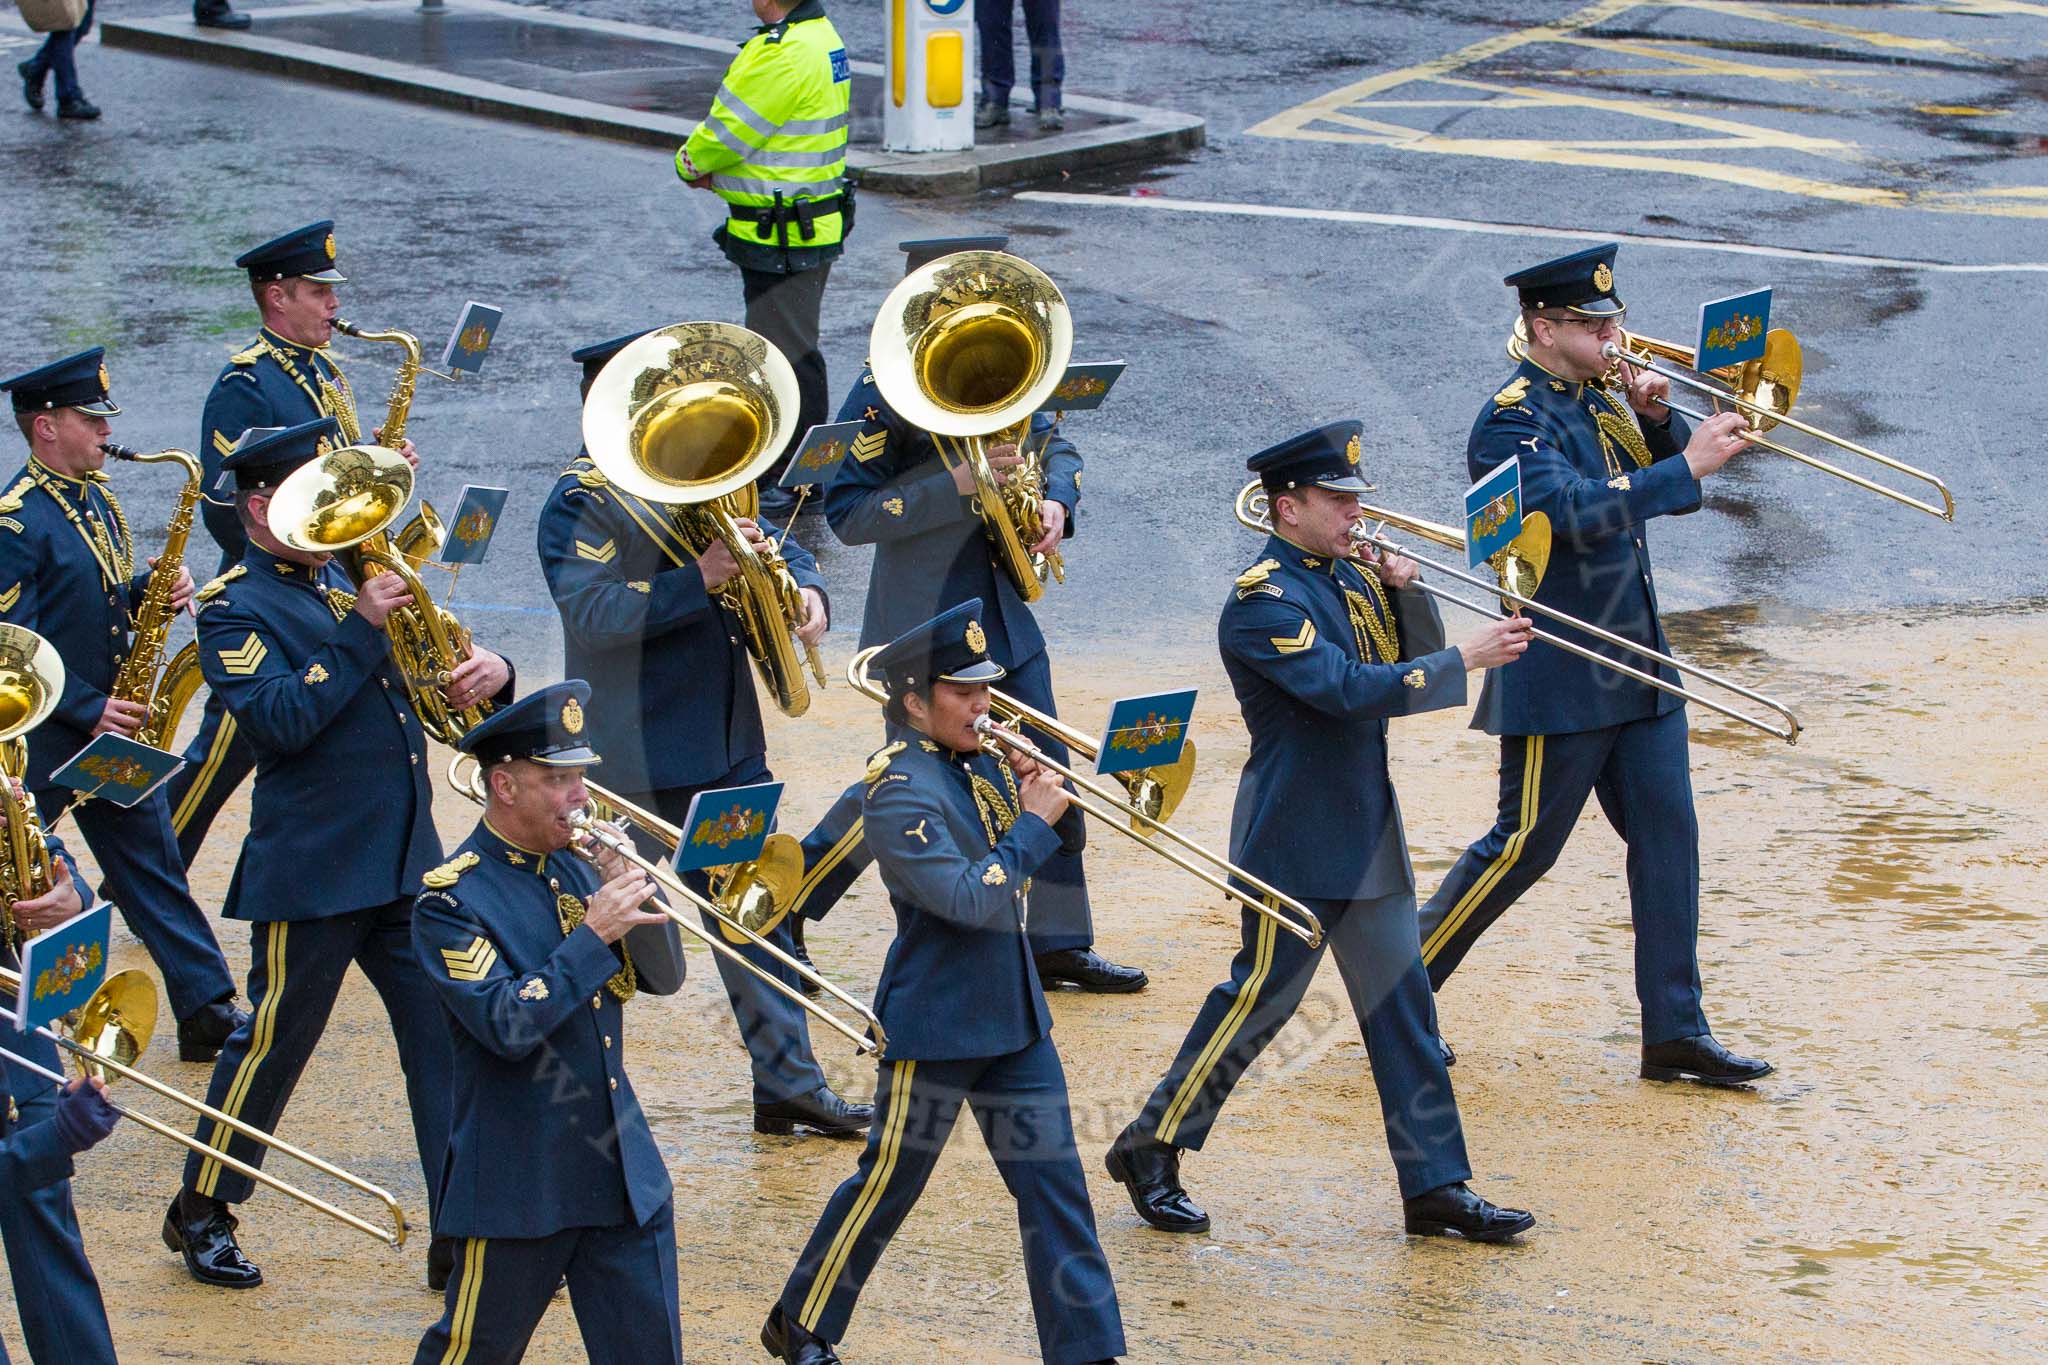 Lord Mayor's Show 2012: Entry 16 - Central Band of the RAF..
Press stand opposite Mansion House, City of London,
London,
Greater London,
United Kingdom,
on 10 November 2012 at 11:07, image #322